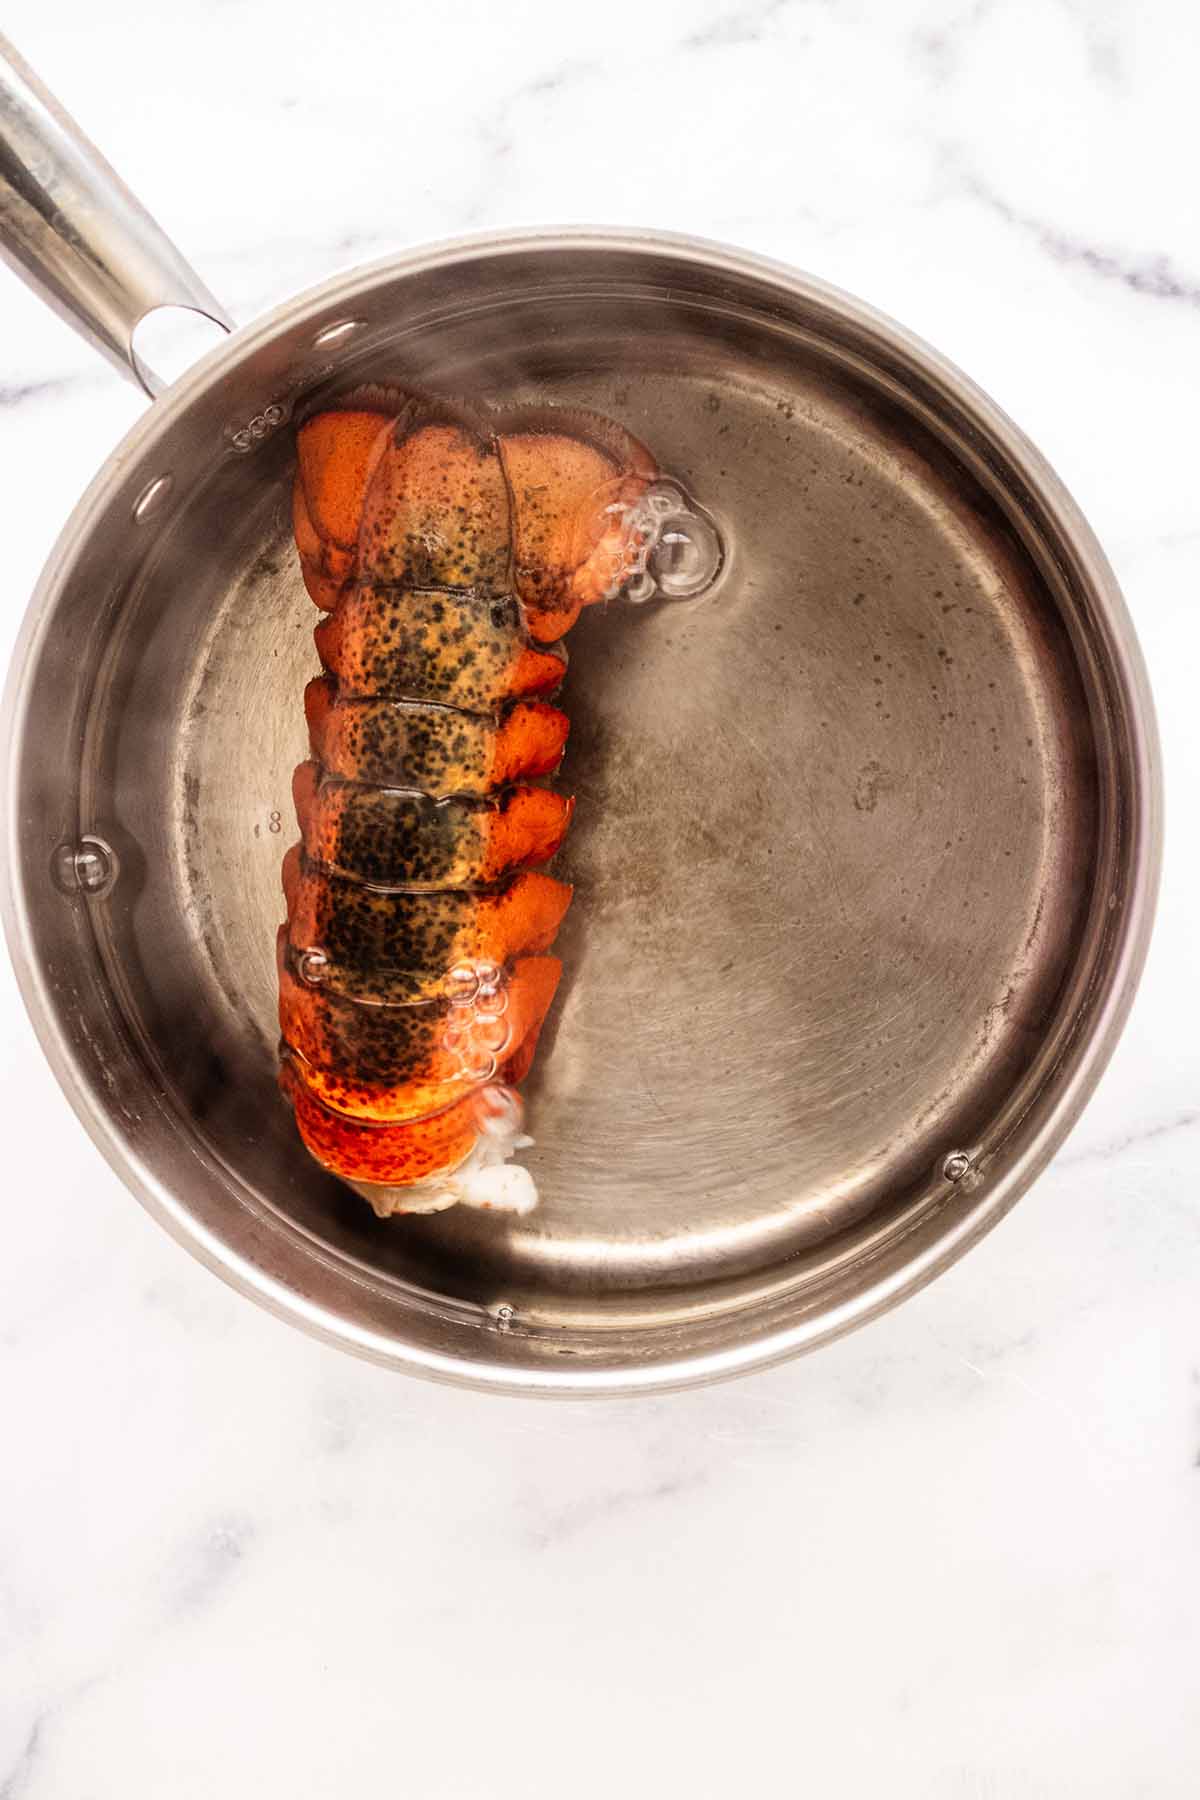 Lobster tail in boiling water in a medium stainless steel saucepan.